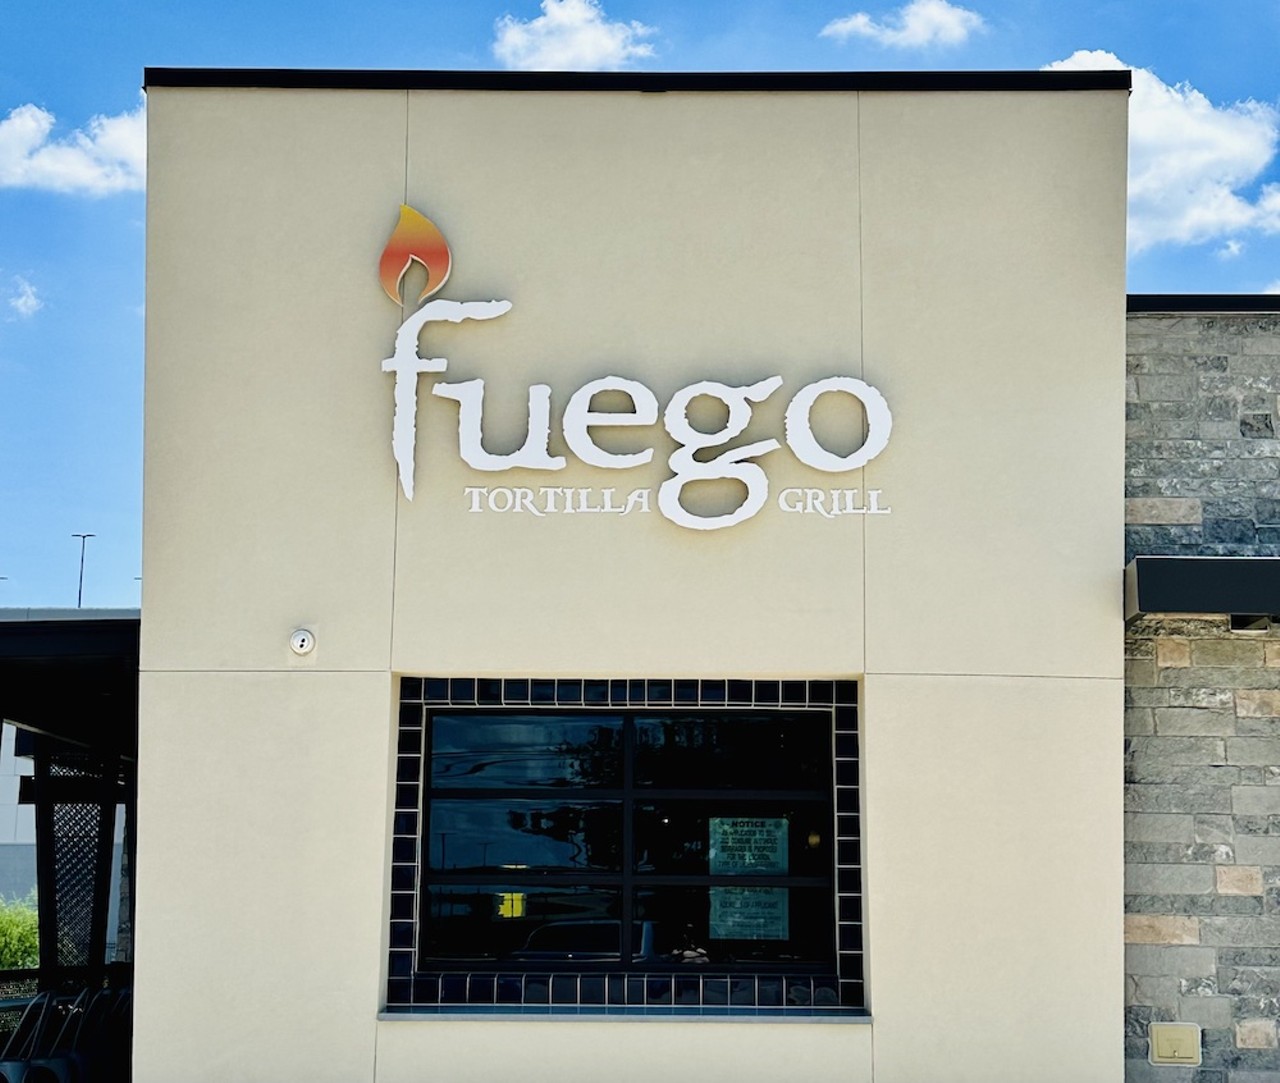  18. Fuego Tortilla Grill5618 UTSA Blvd., (210) 868-6248, fuegotortillagrill.com “Good food. Fast service. Pleasant atmosphere. More than fair prices. Love that it's right across the street from our nearby Costco. Very convenient. Don't expect fancy things--it's not designed for that. But if you want a tasty, filling meal and super tasty fruit drinks, this the place” - Antonio C.